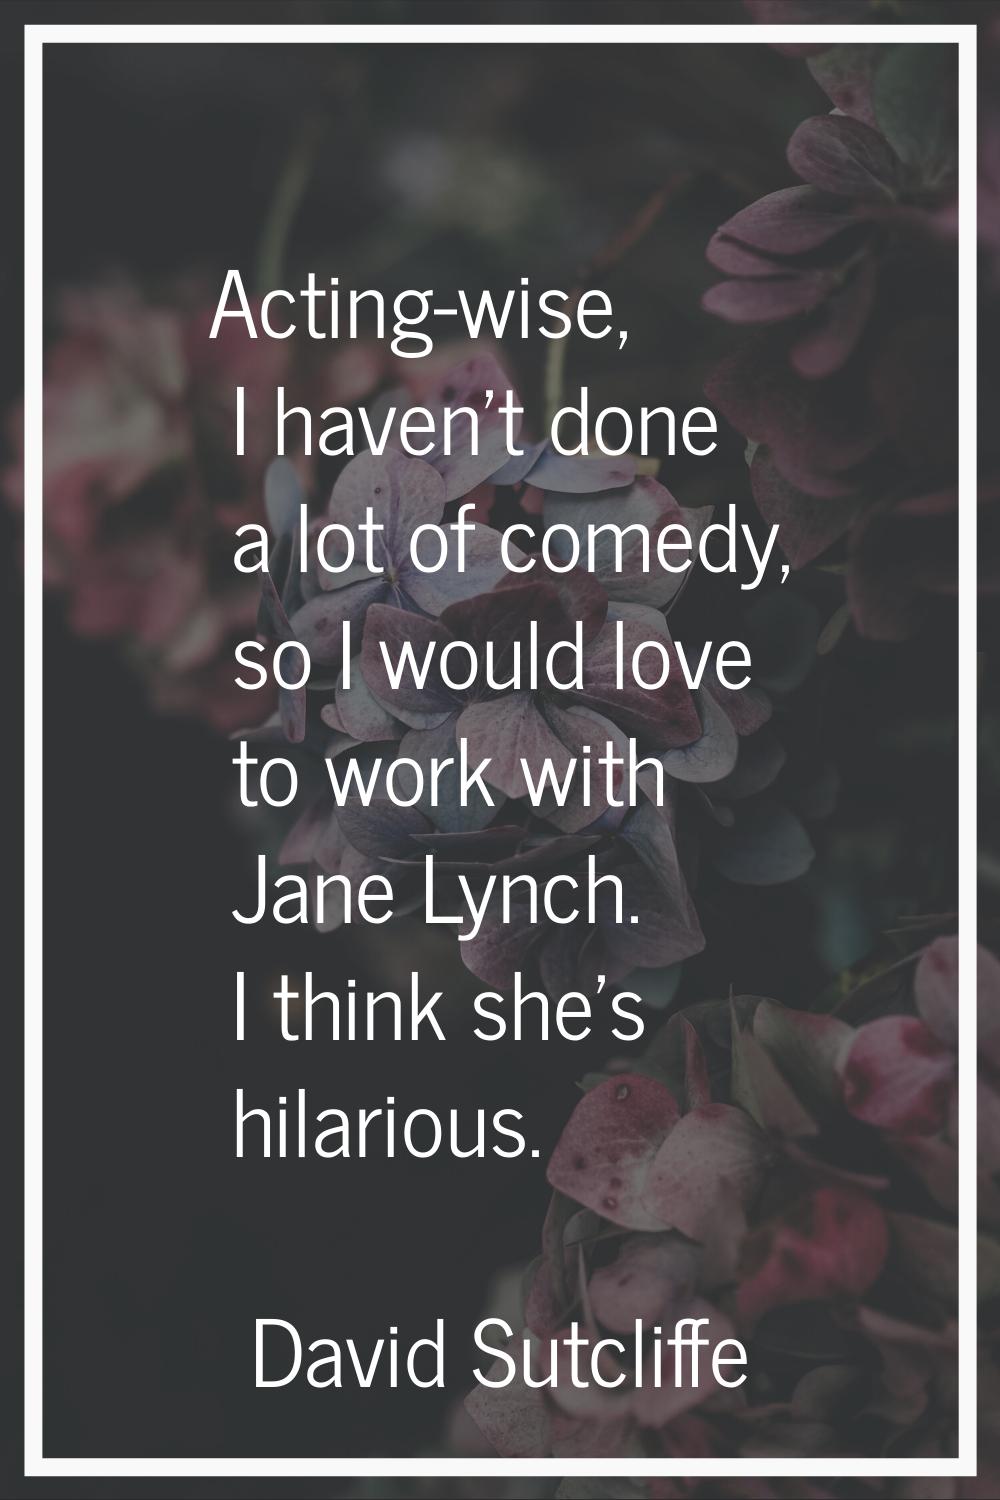 Acting-wise, I haven't done a lot of comedy, so I would love to work with Jane Lynch. I think she's